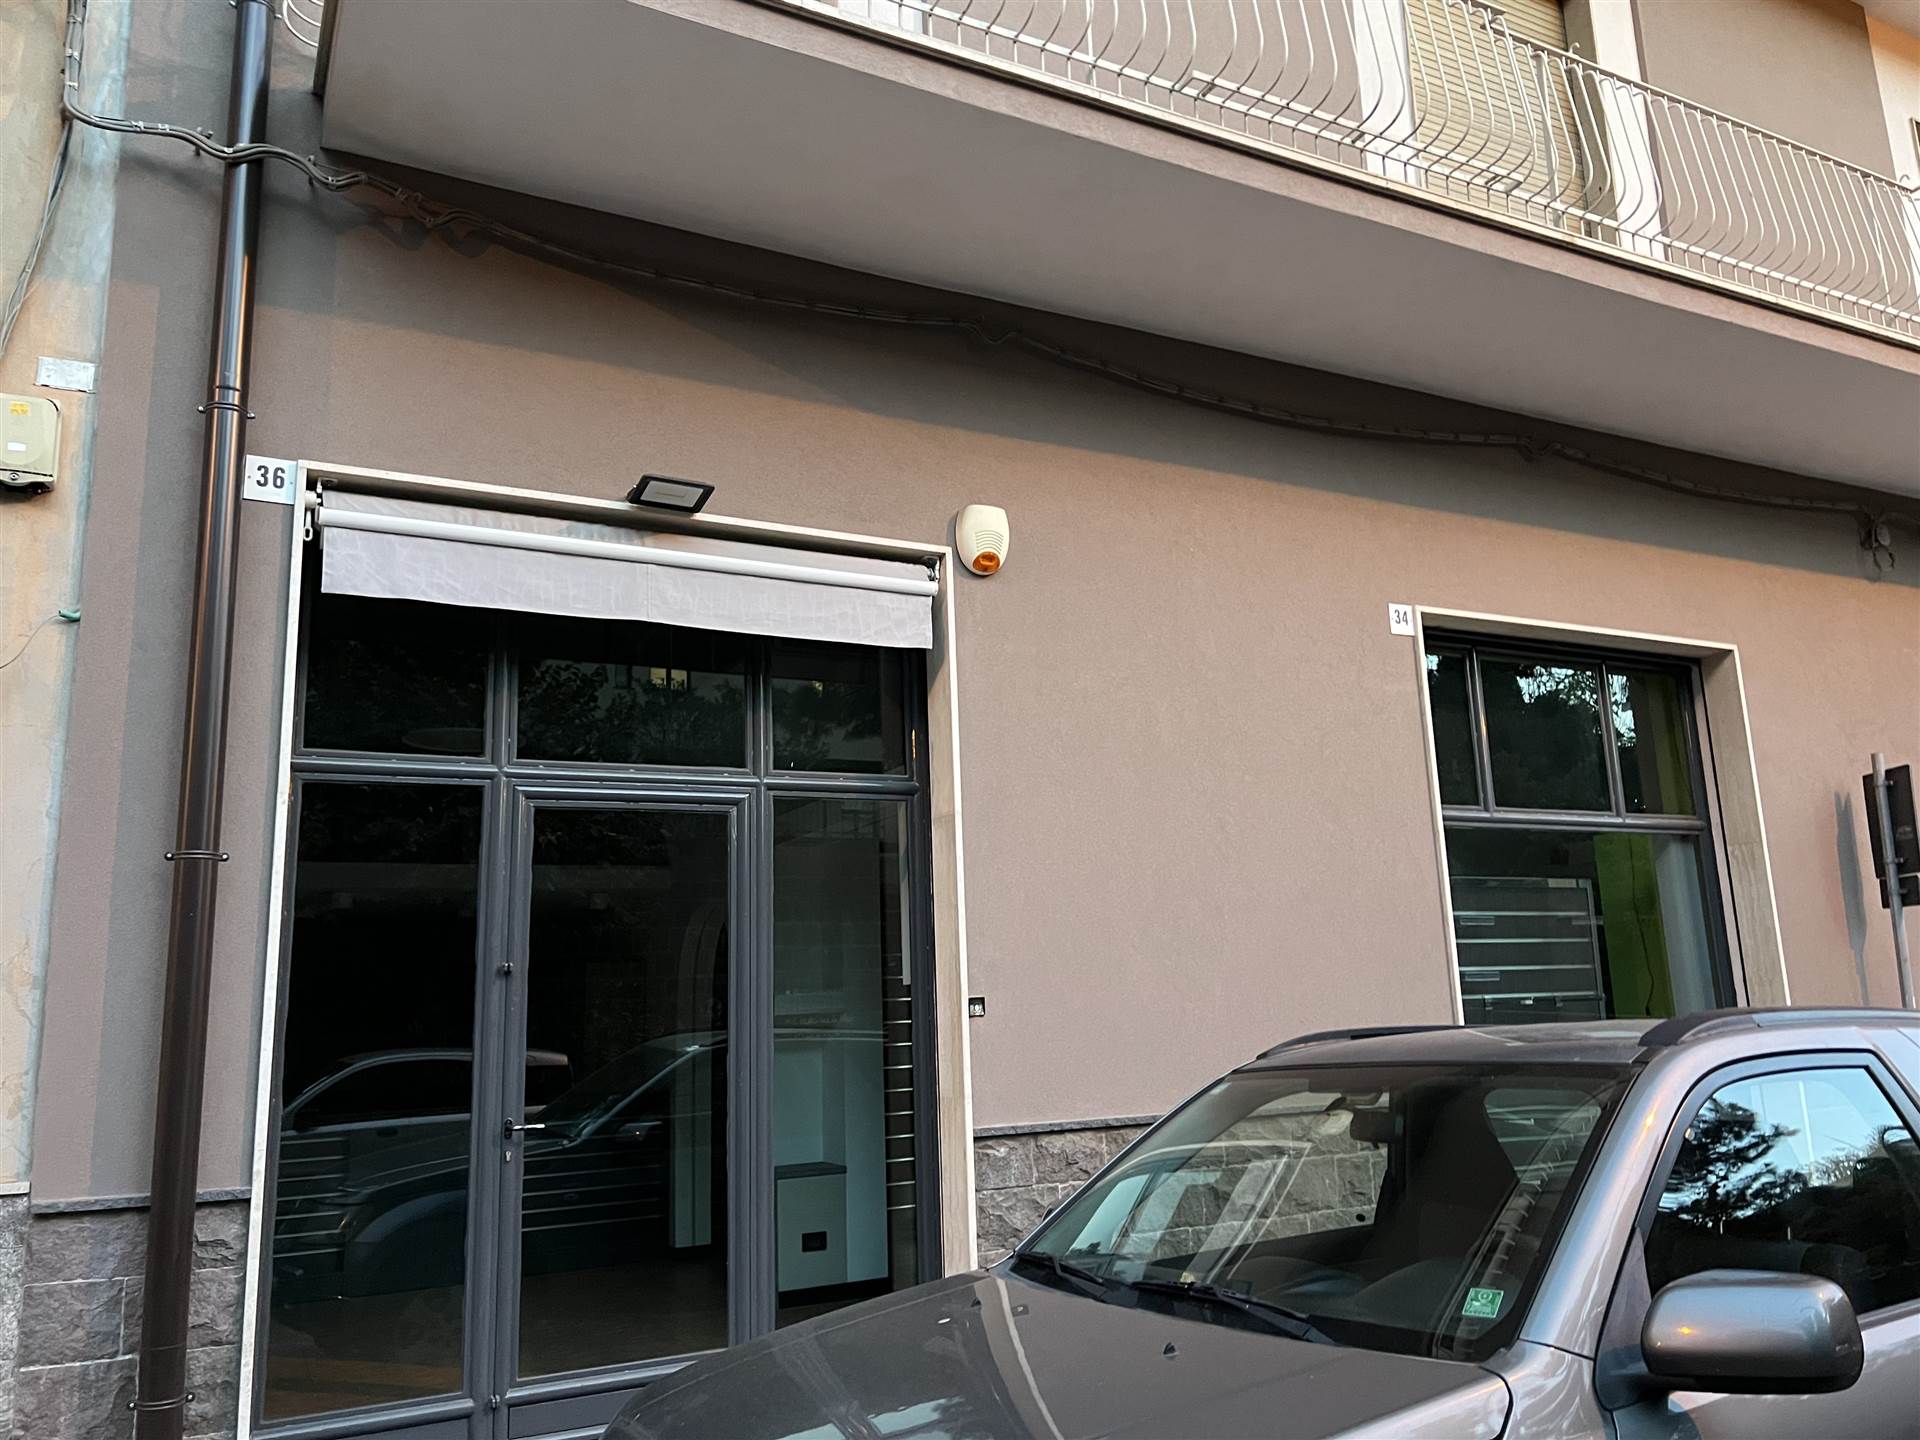 ACIREALE, Commercial business for rent of 84 Sq. mt., Energetic class: G, composed by: 4 Rooms, 1 Bathroom, Price: € 600